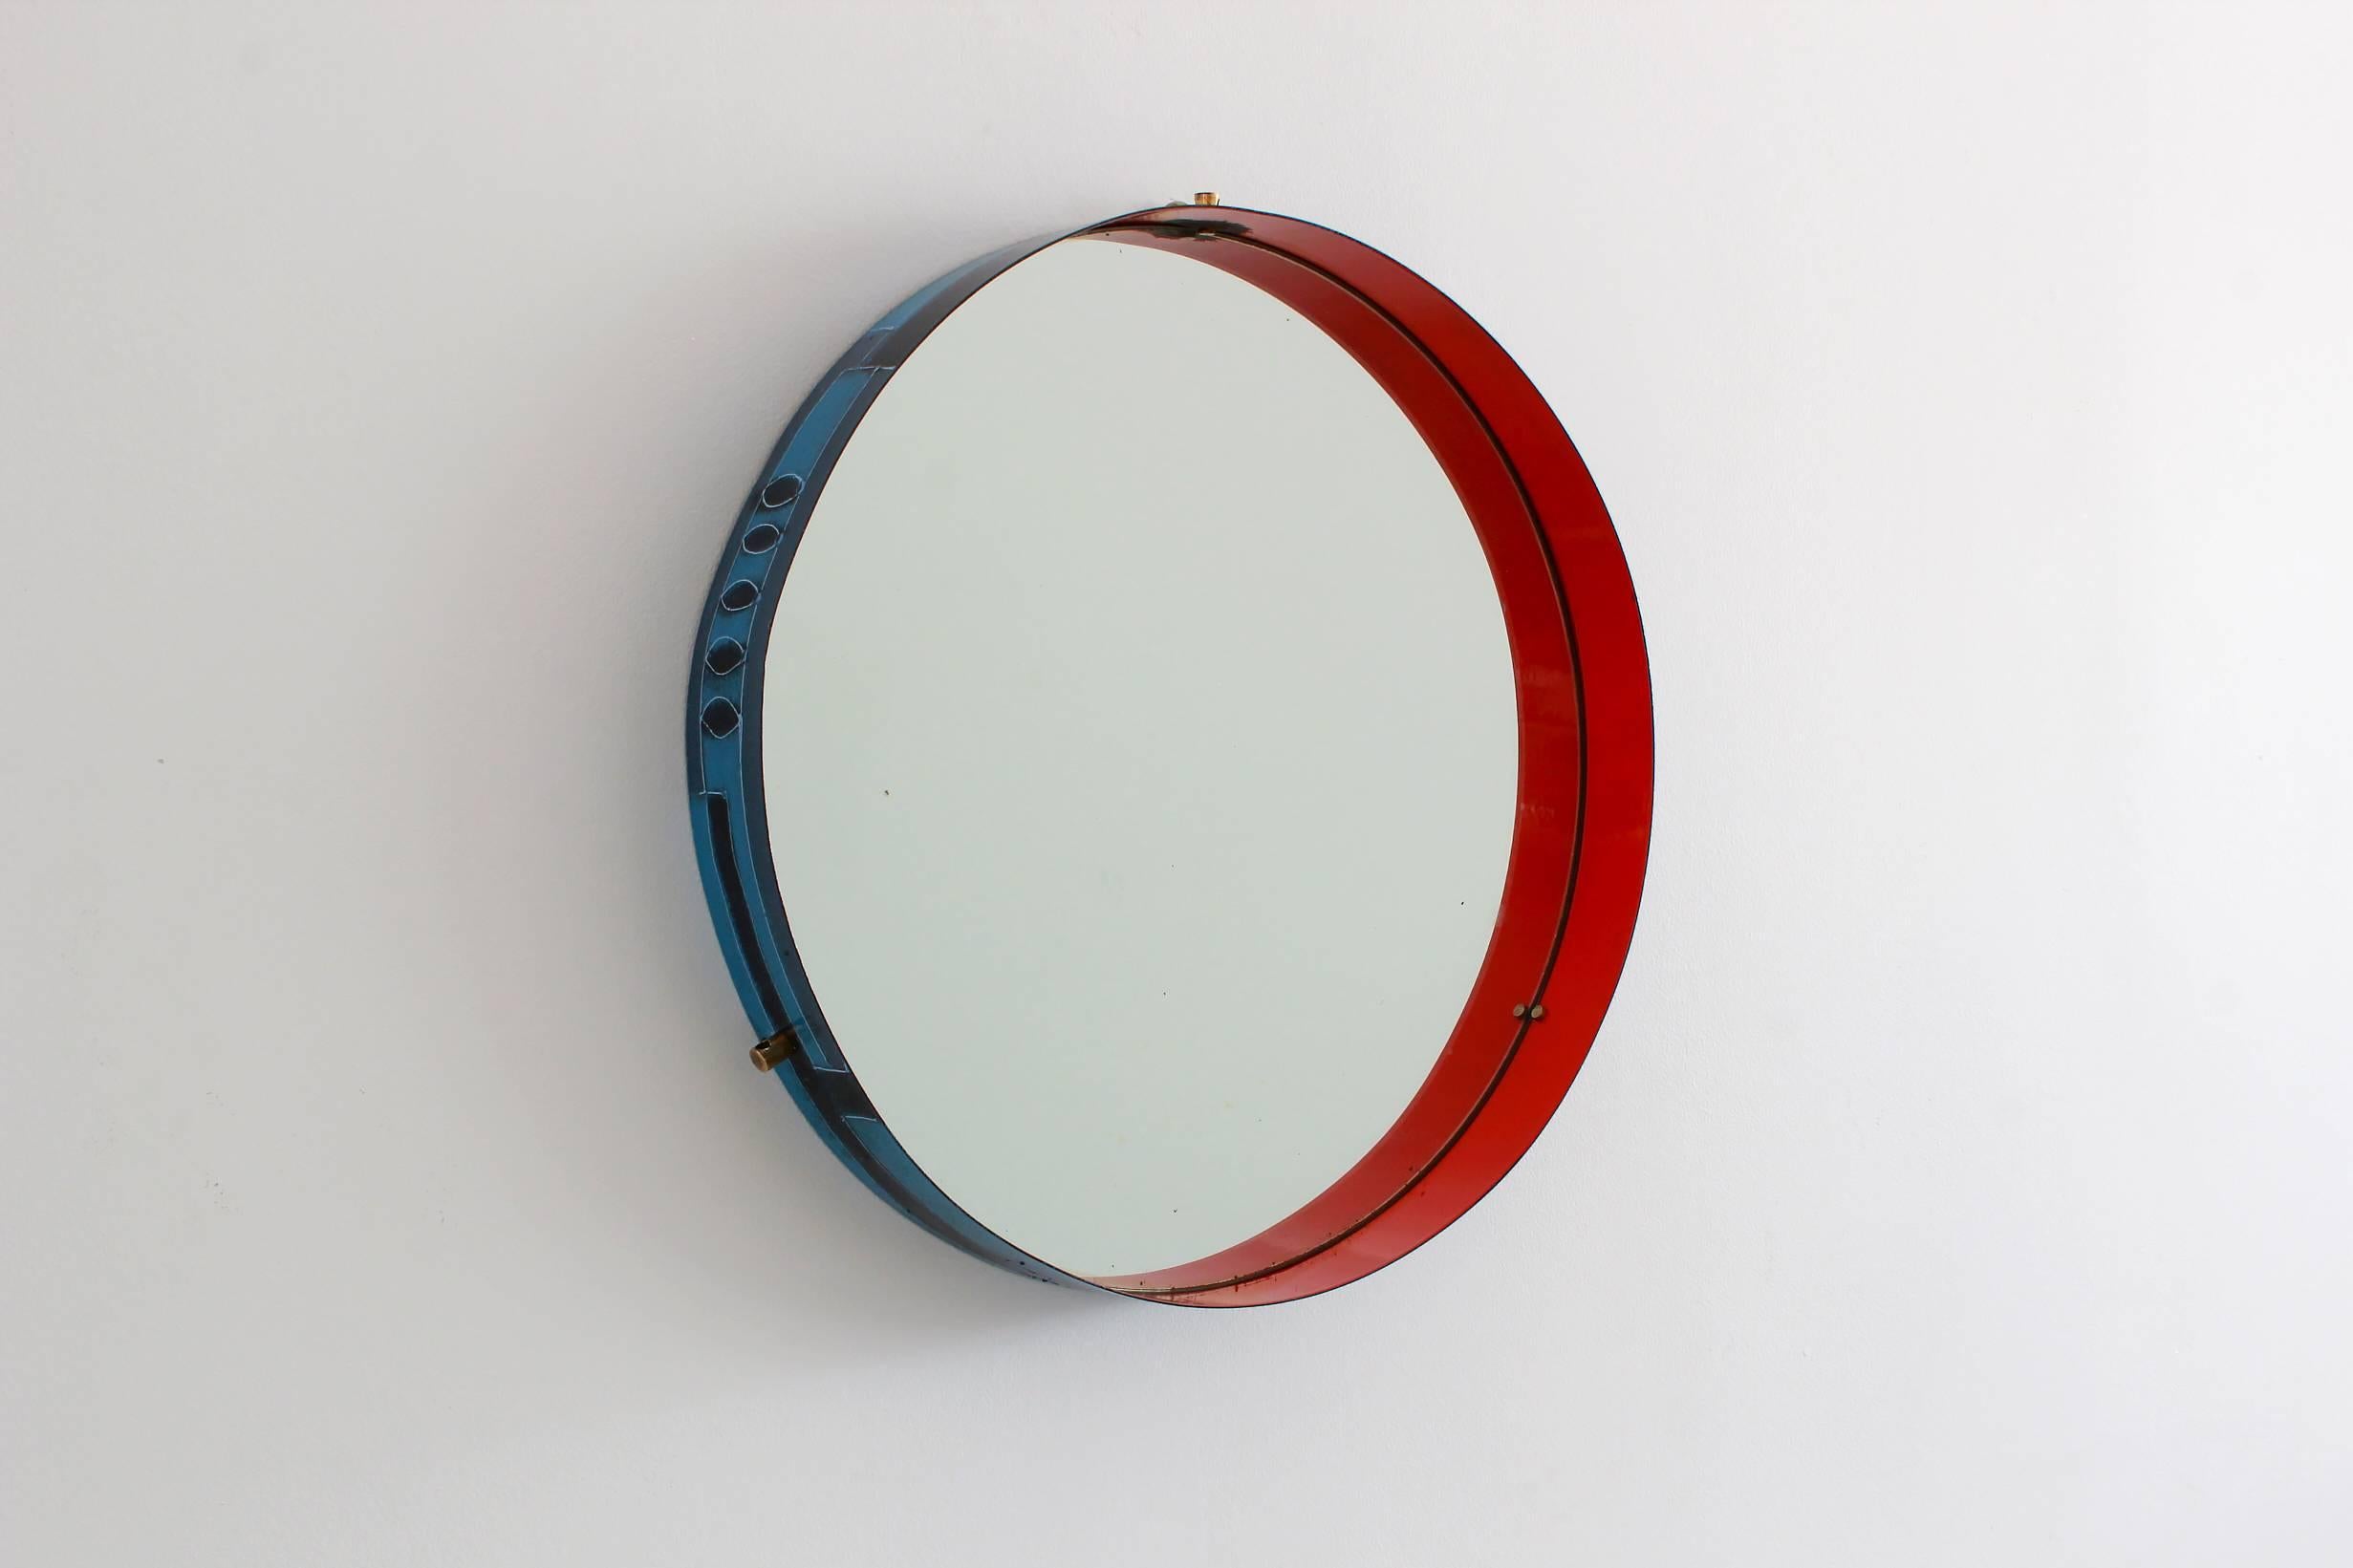 Stunning Italian circular wall mirror in blue and red ceramic on metal frame. Exterior of frame has painted shades of blue with leaf and geometric design. Interior is painted in a deep red lacquer. Amazing primary colors excite from all angles.